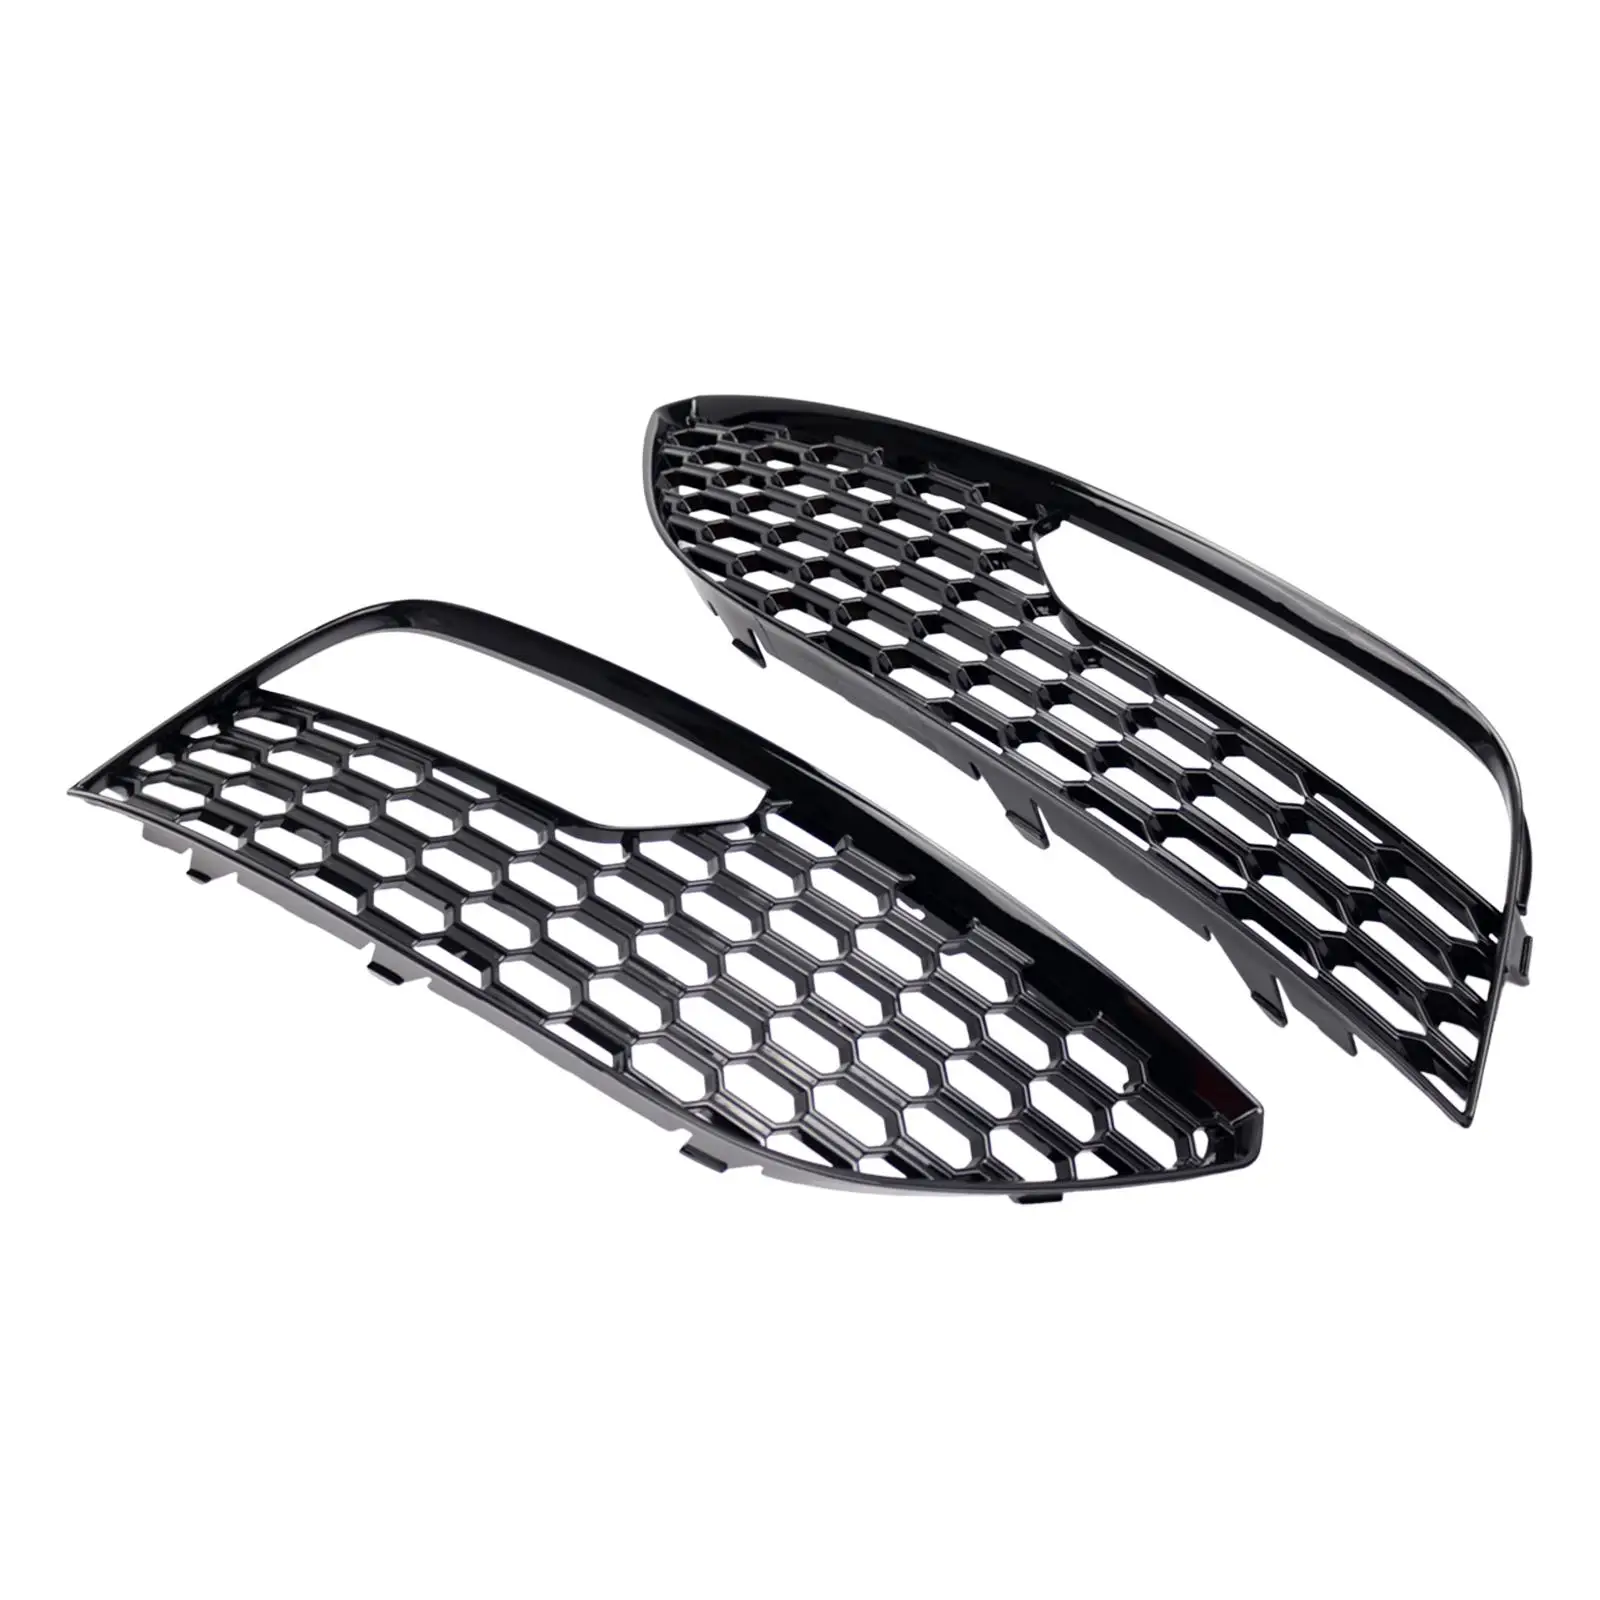 2 Pieces Fog Light Grille Covers 8V3807681 8V3807682 Wear Resistant Replaces Fog Lamp Cover Insert for Audi A3 S3 2012-2016